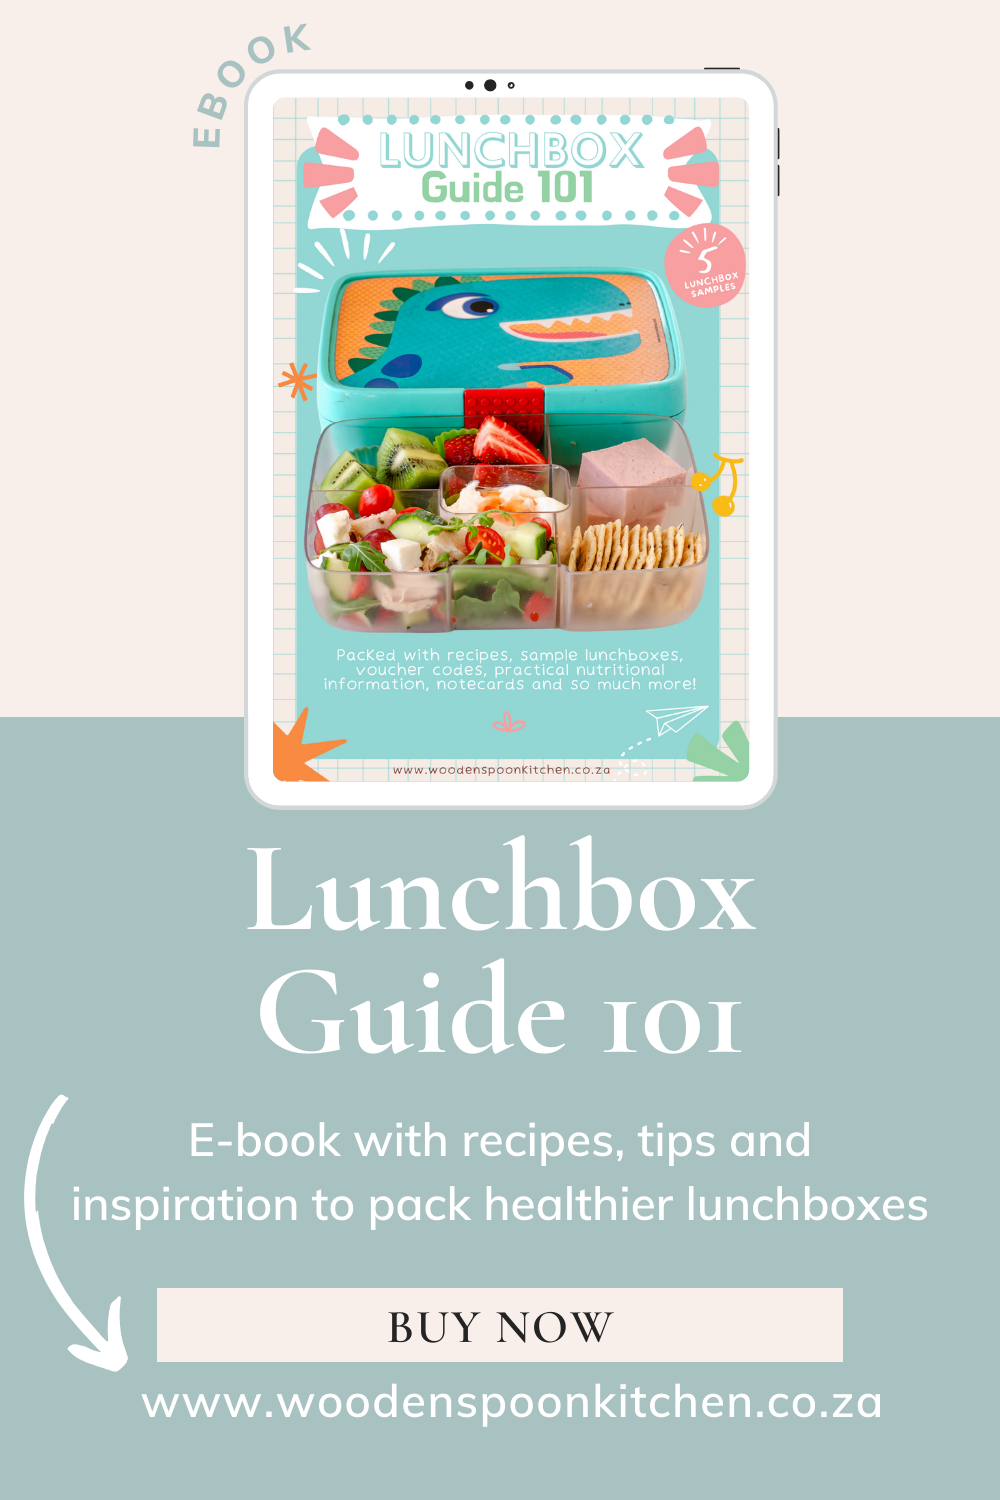 Lunchbox Guide 101